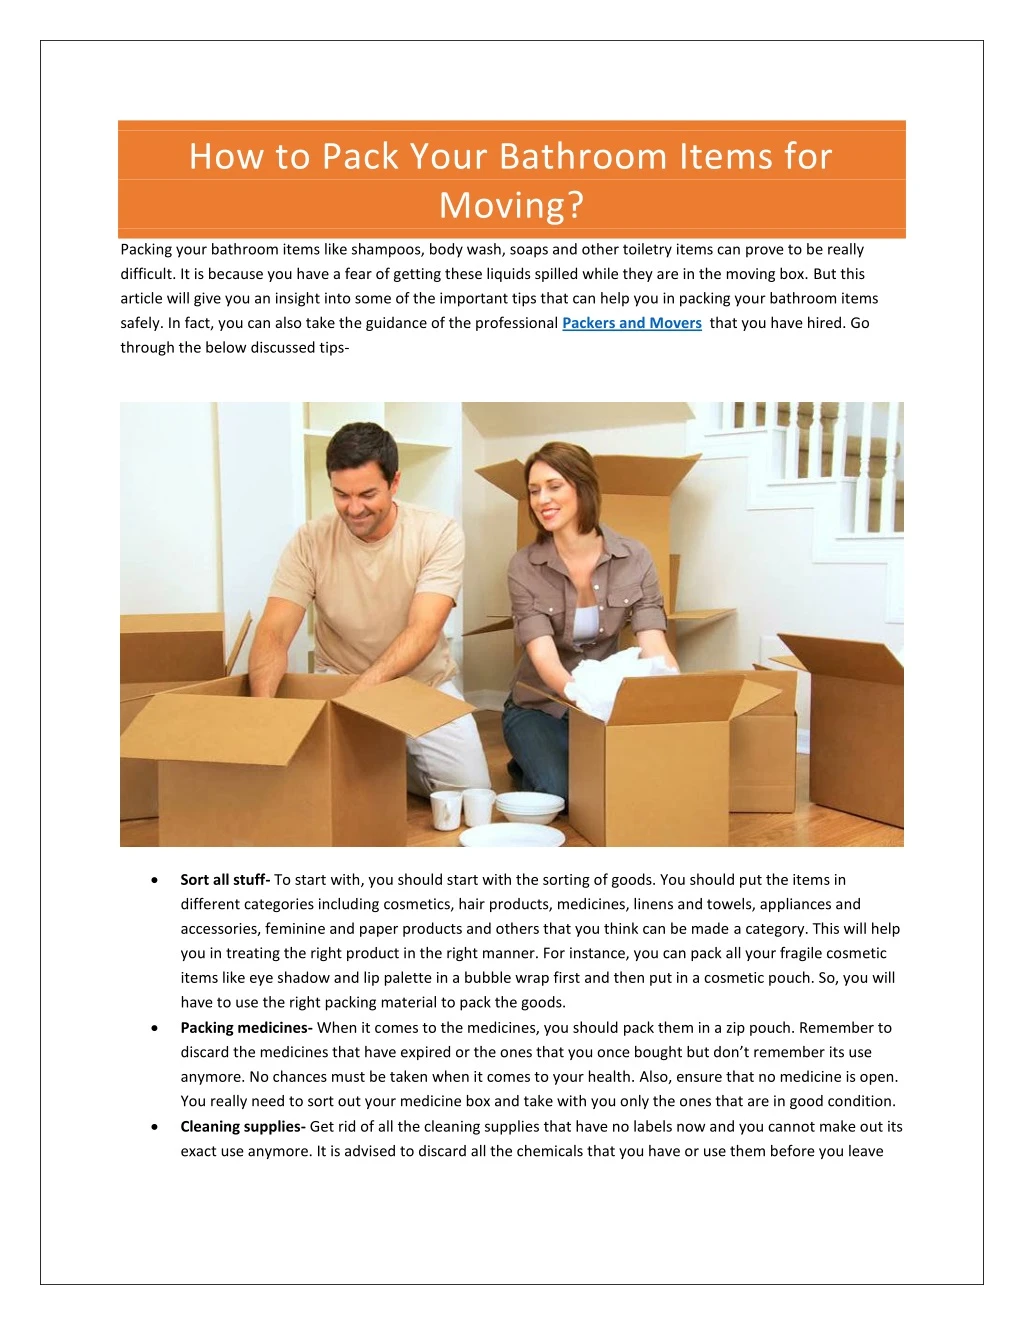 how to pack your bathroom items for moving